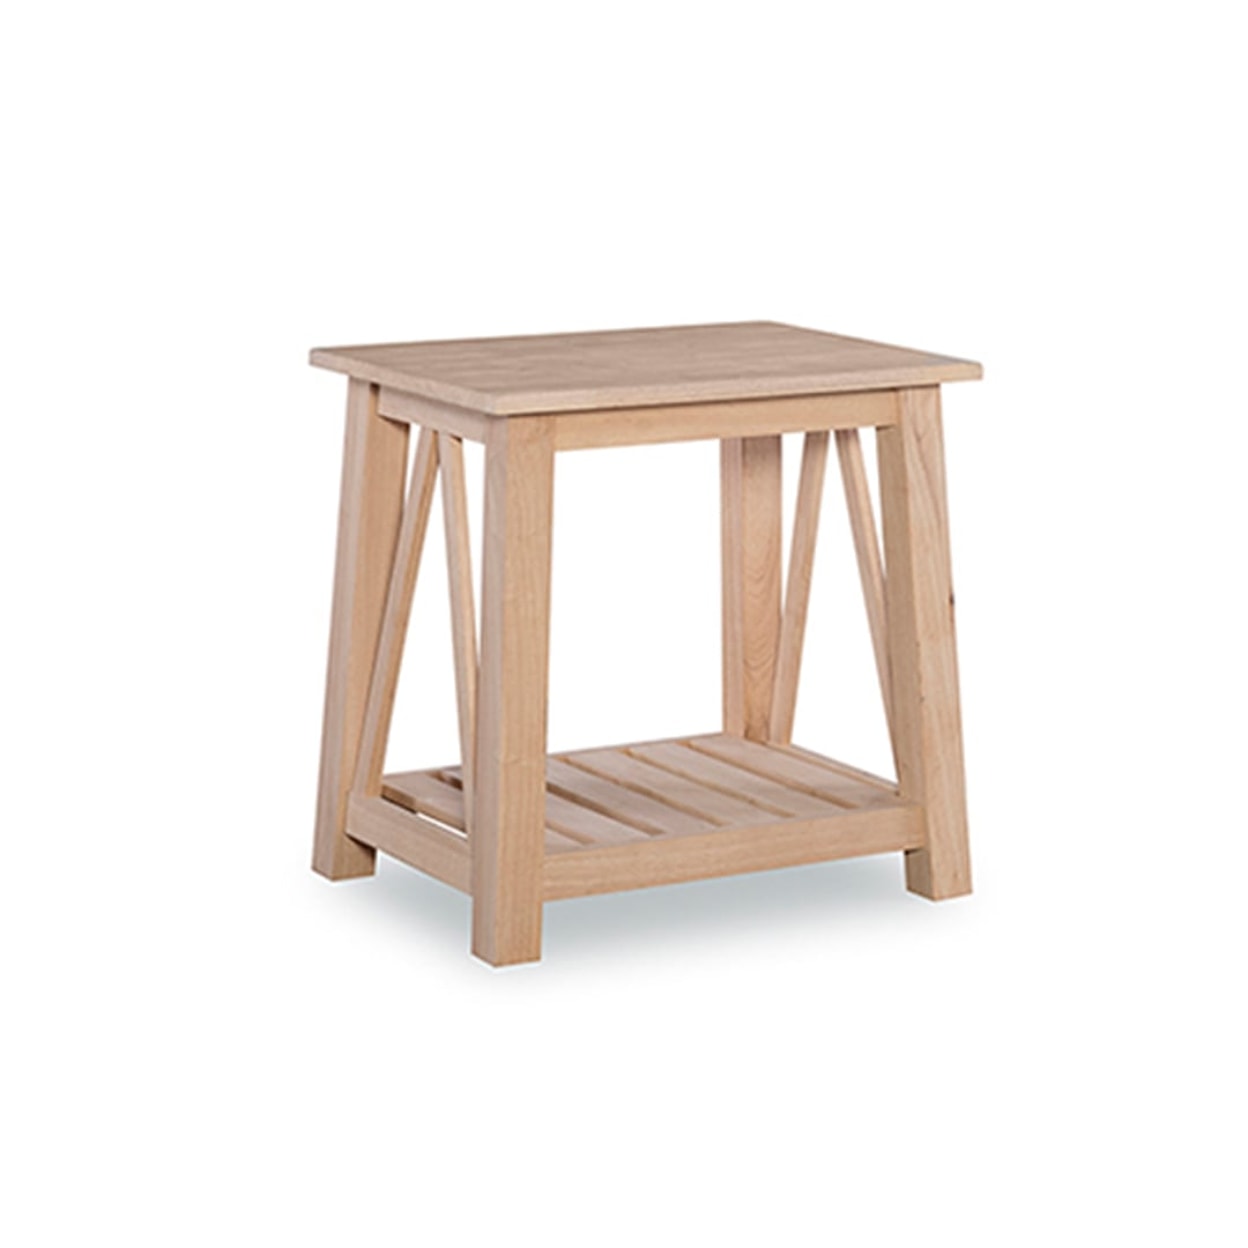 John Thomas SELECT Occasional & Accents Surrey End Table